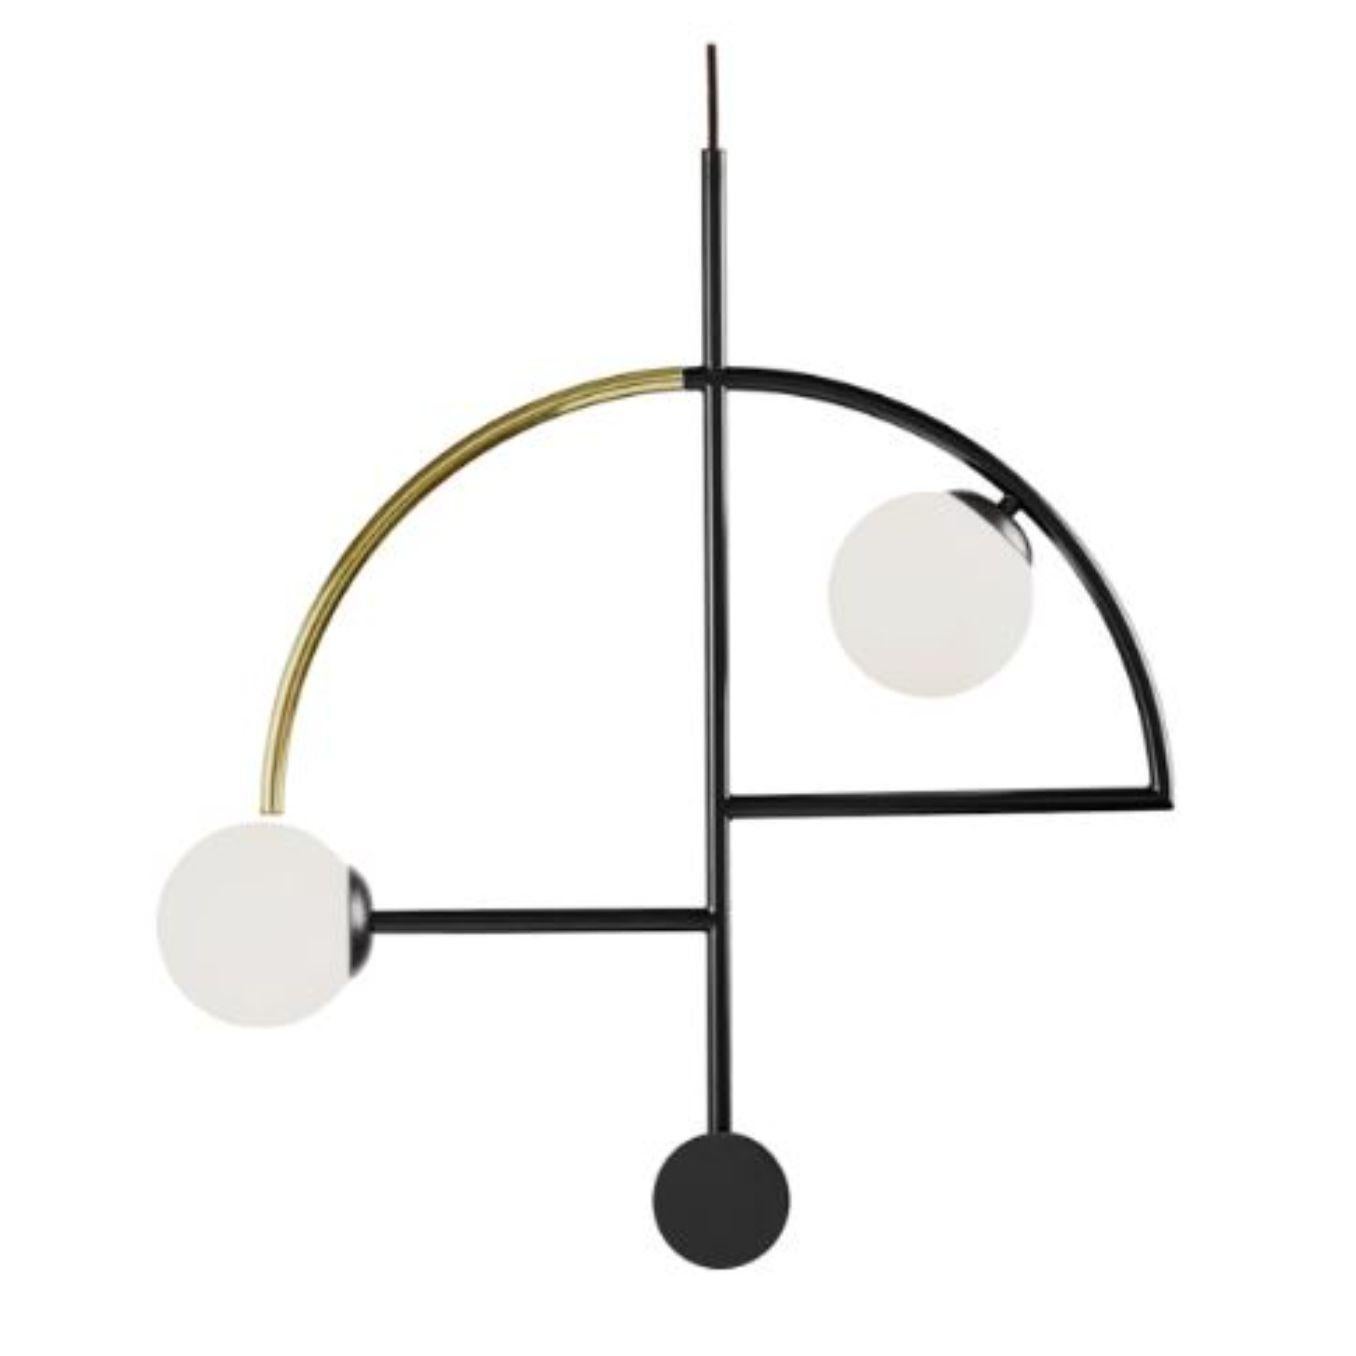 Black Helio II Suspension lamp by Dooq
Dimensions: W 35 x D 35 x H 50 cm
Materials: lacquered metal, brass/nickel.
Also available in different colors and materials. 

Information:
230V/50Hz
2 x max. G9
4W LED

120V/60Hz
2 x max. G9
4W LED

All our